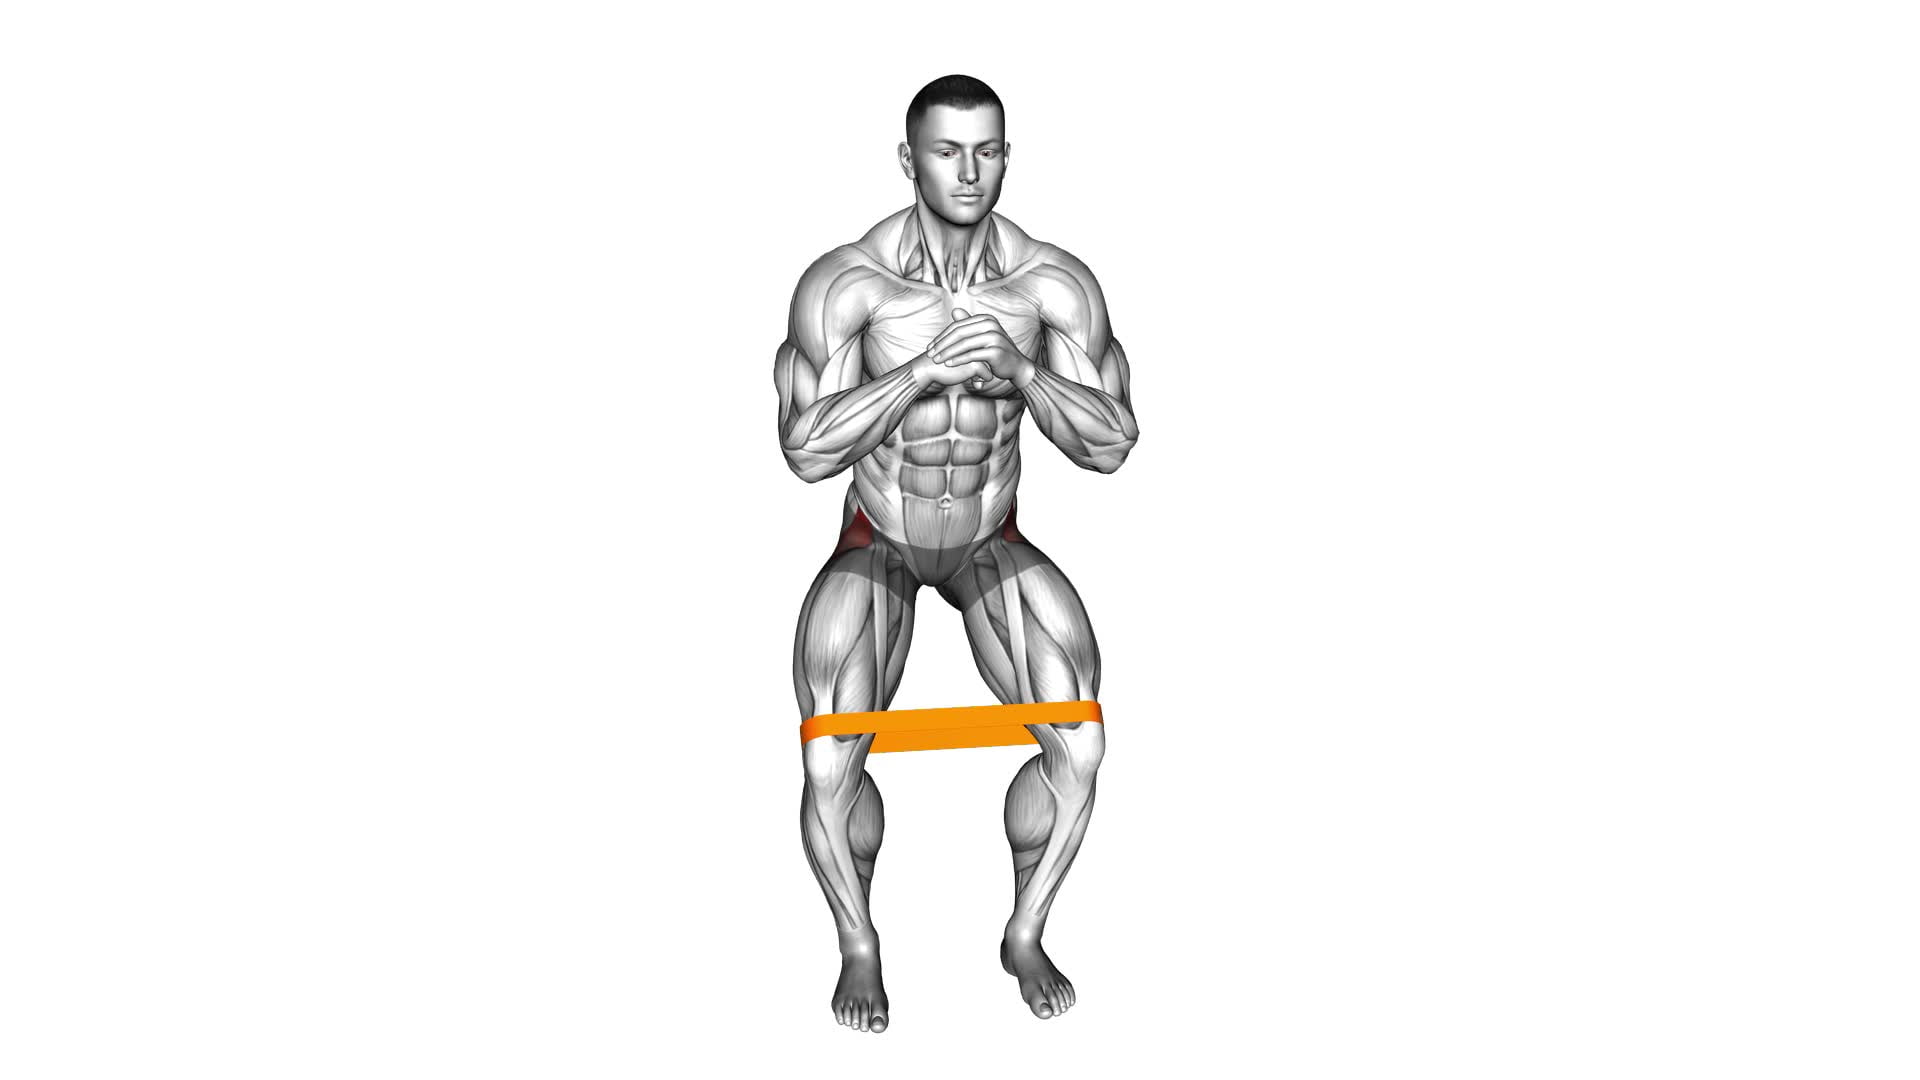 Resistance Band Standing Hip Abduction - Video Exercise Guide & Tips